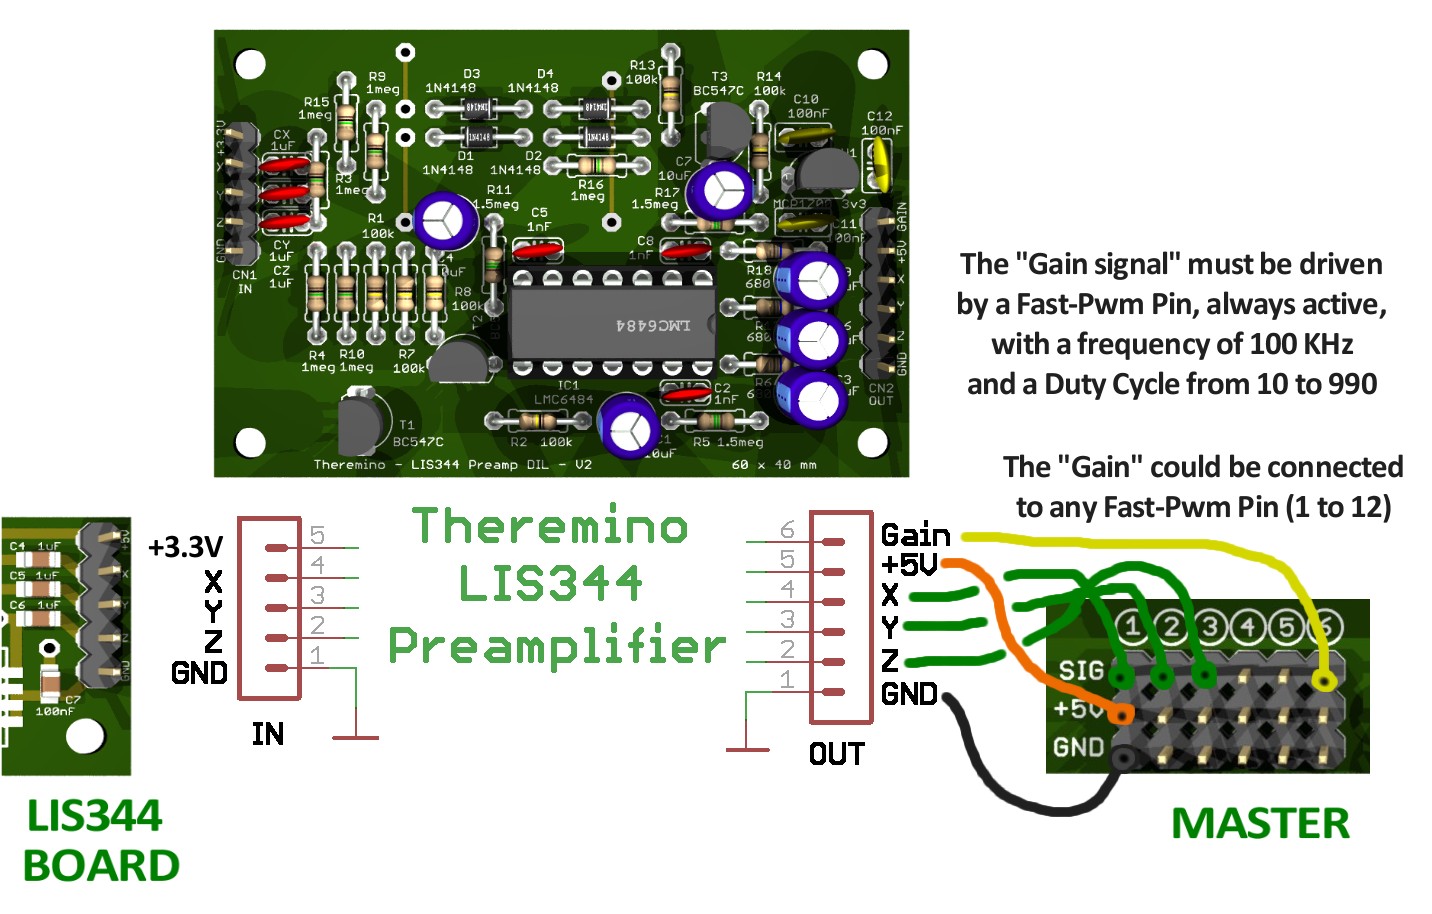 Lis344_Preamp_Connections1